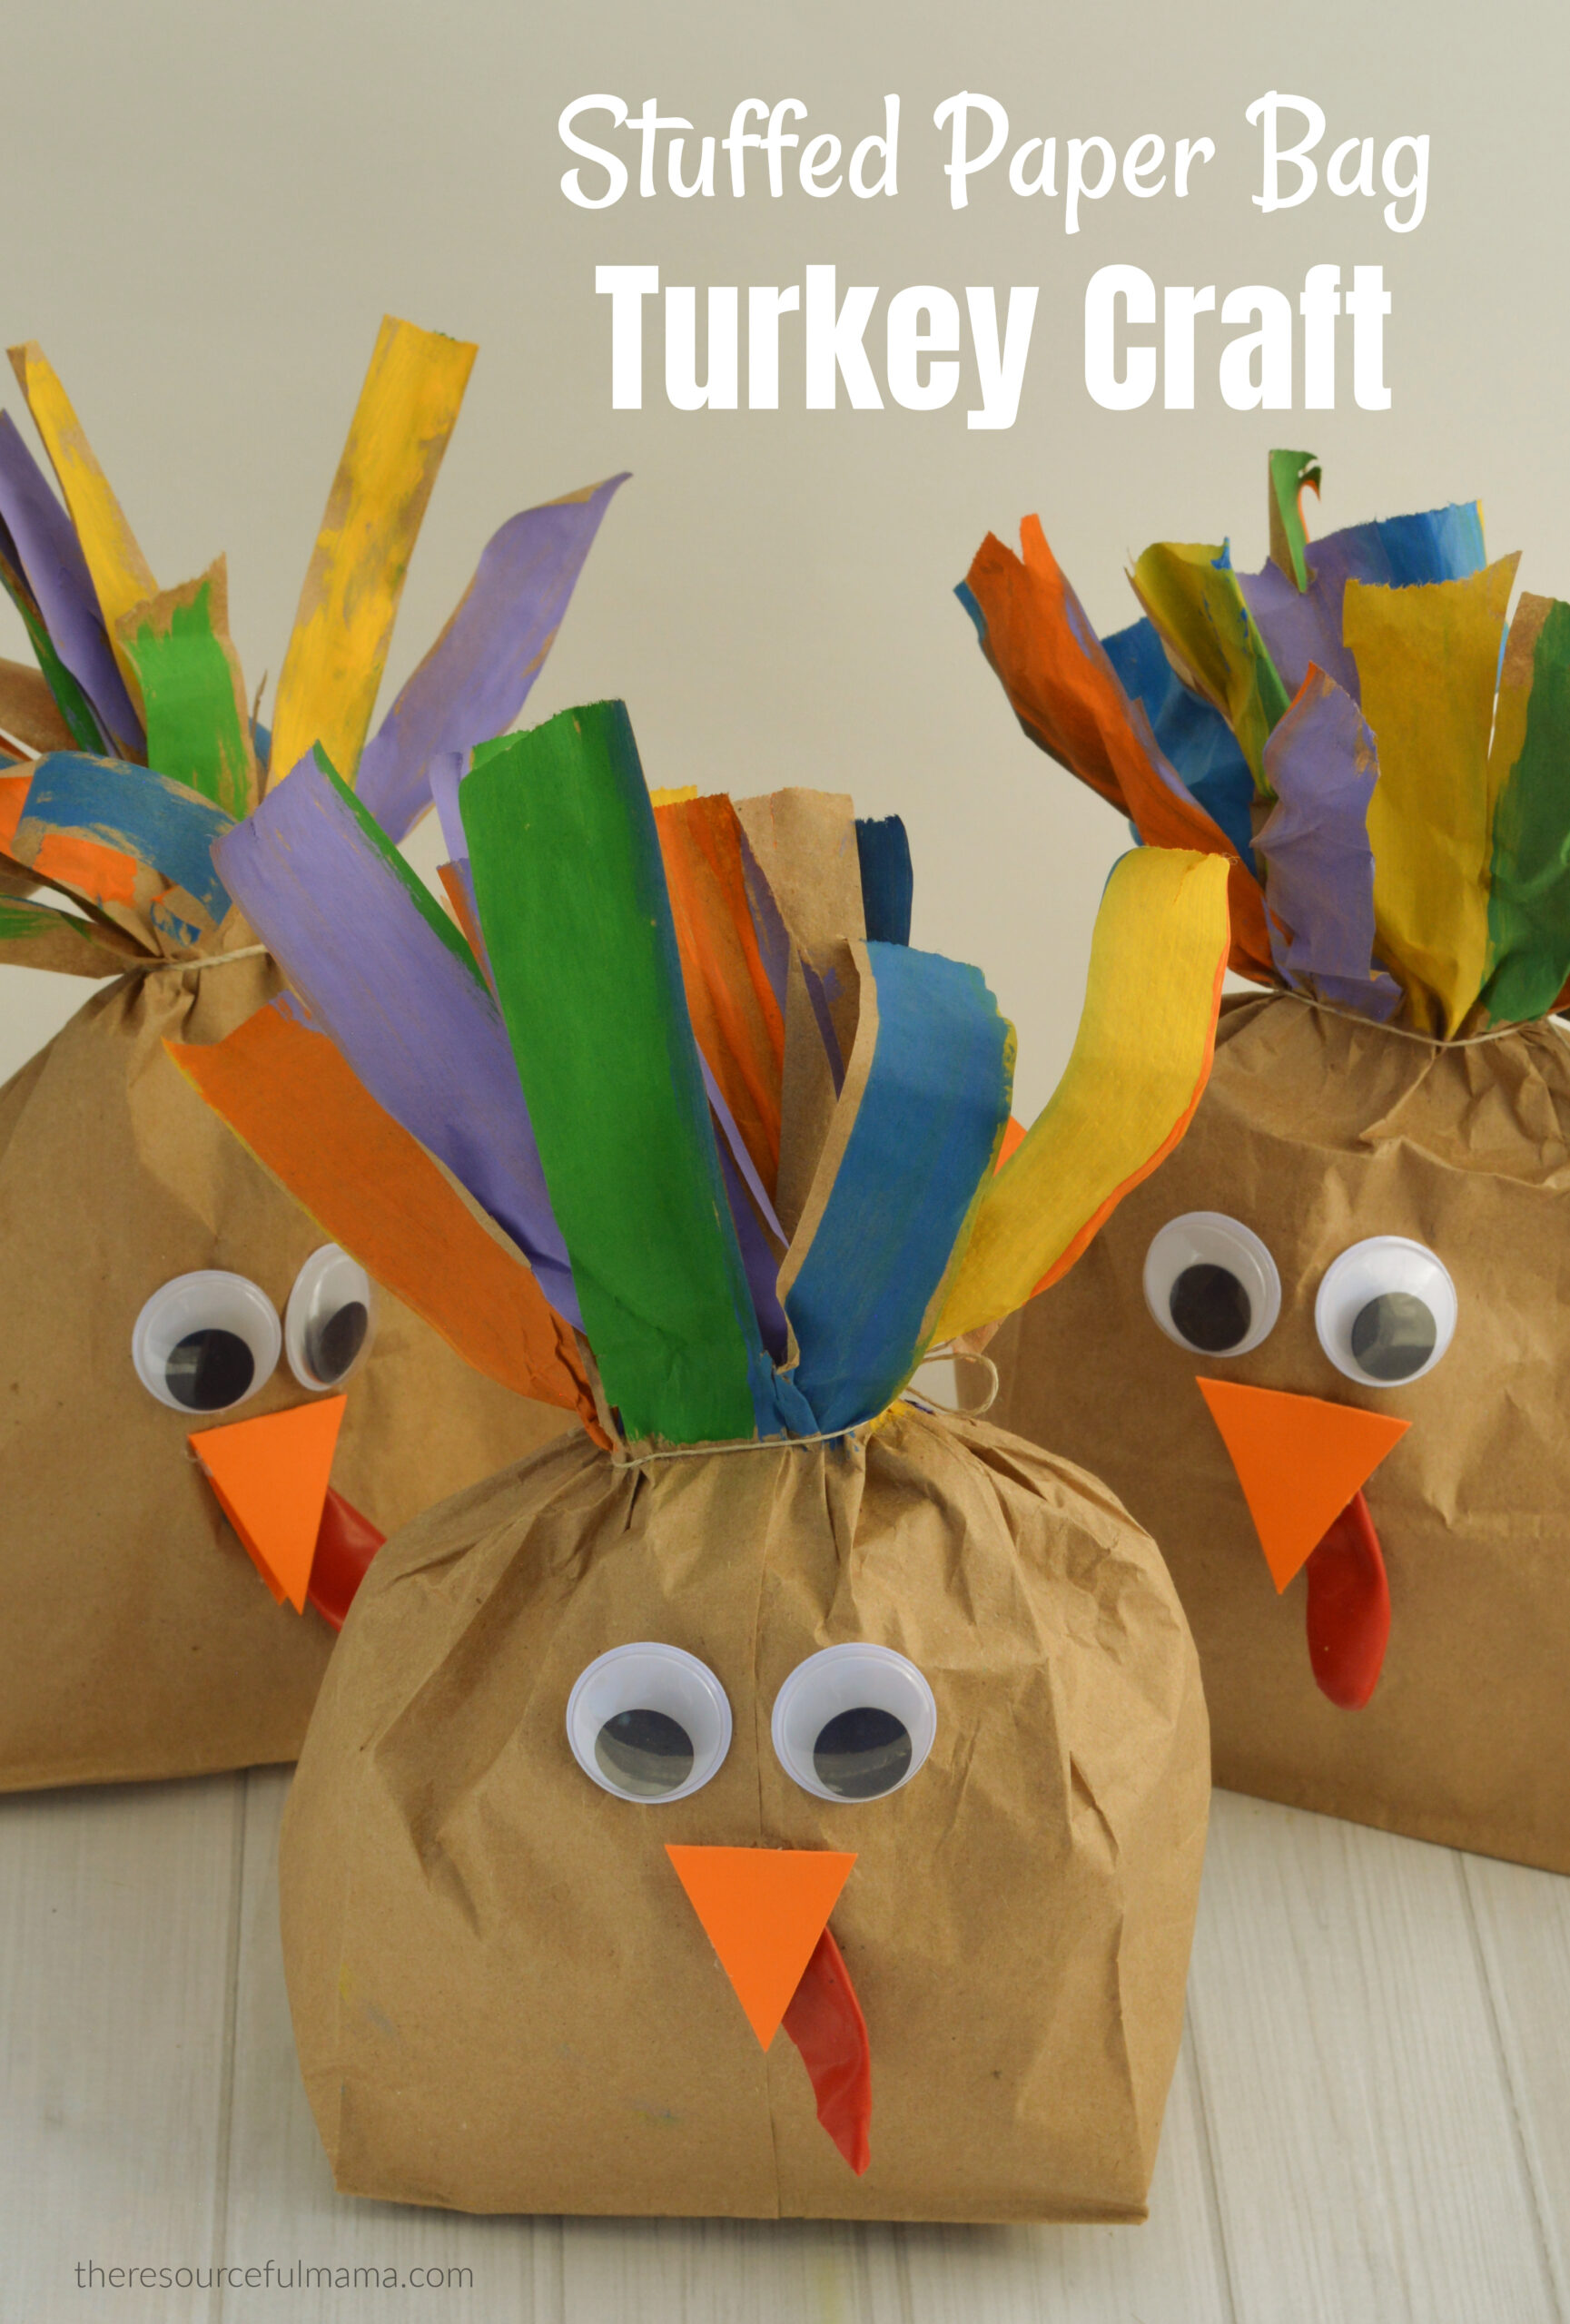 Turn your brown paper lunch bags into a plump and playful stuffed paper bag turkey craft for kids this Thanksgiving. This easy, inexpensive craft is quick and easy to put together with items you likely have on hand. They make a cute homemade decoration for your Thanksgiving table. 